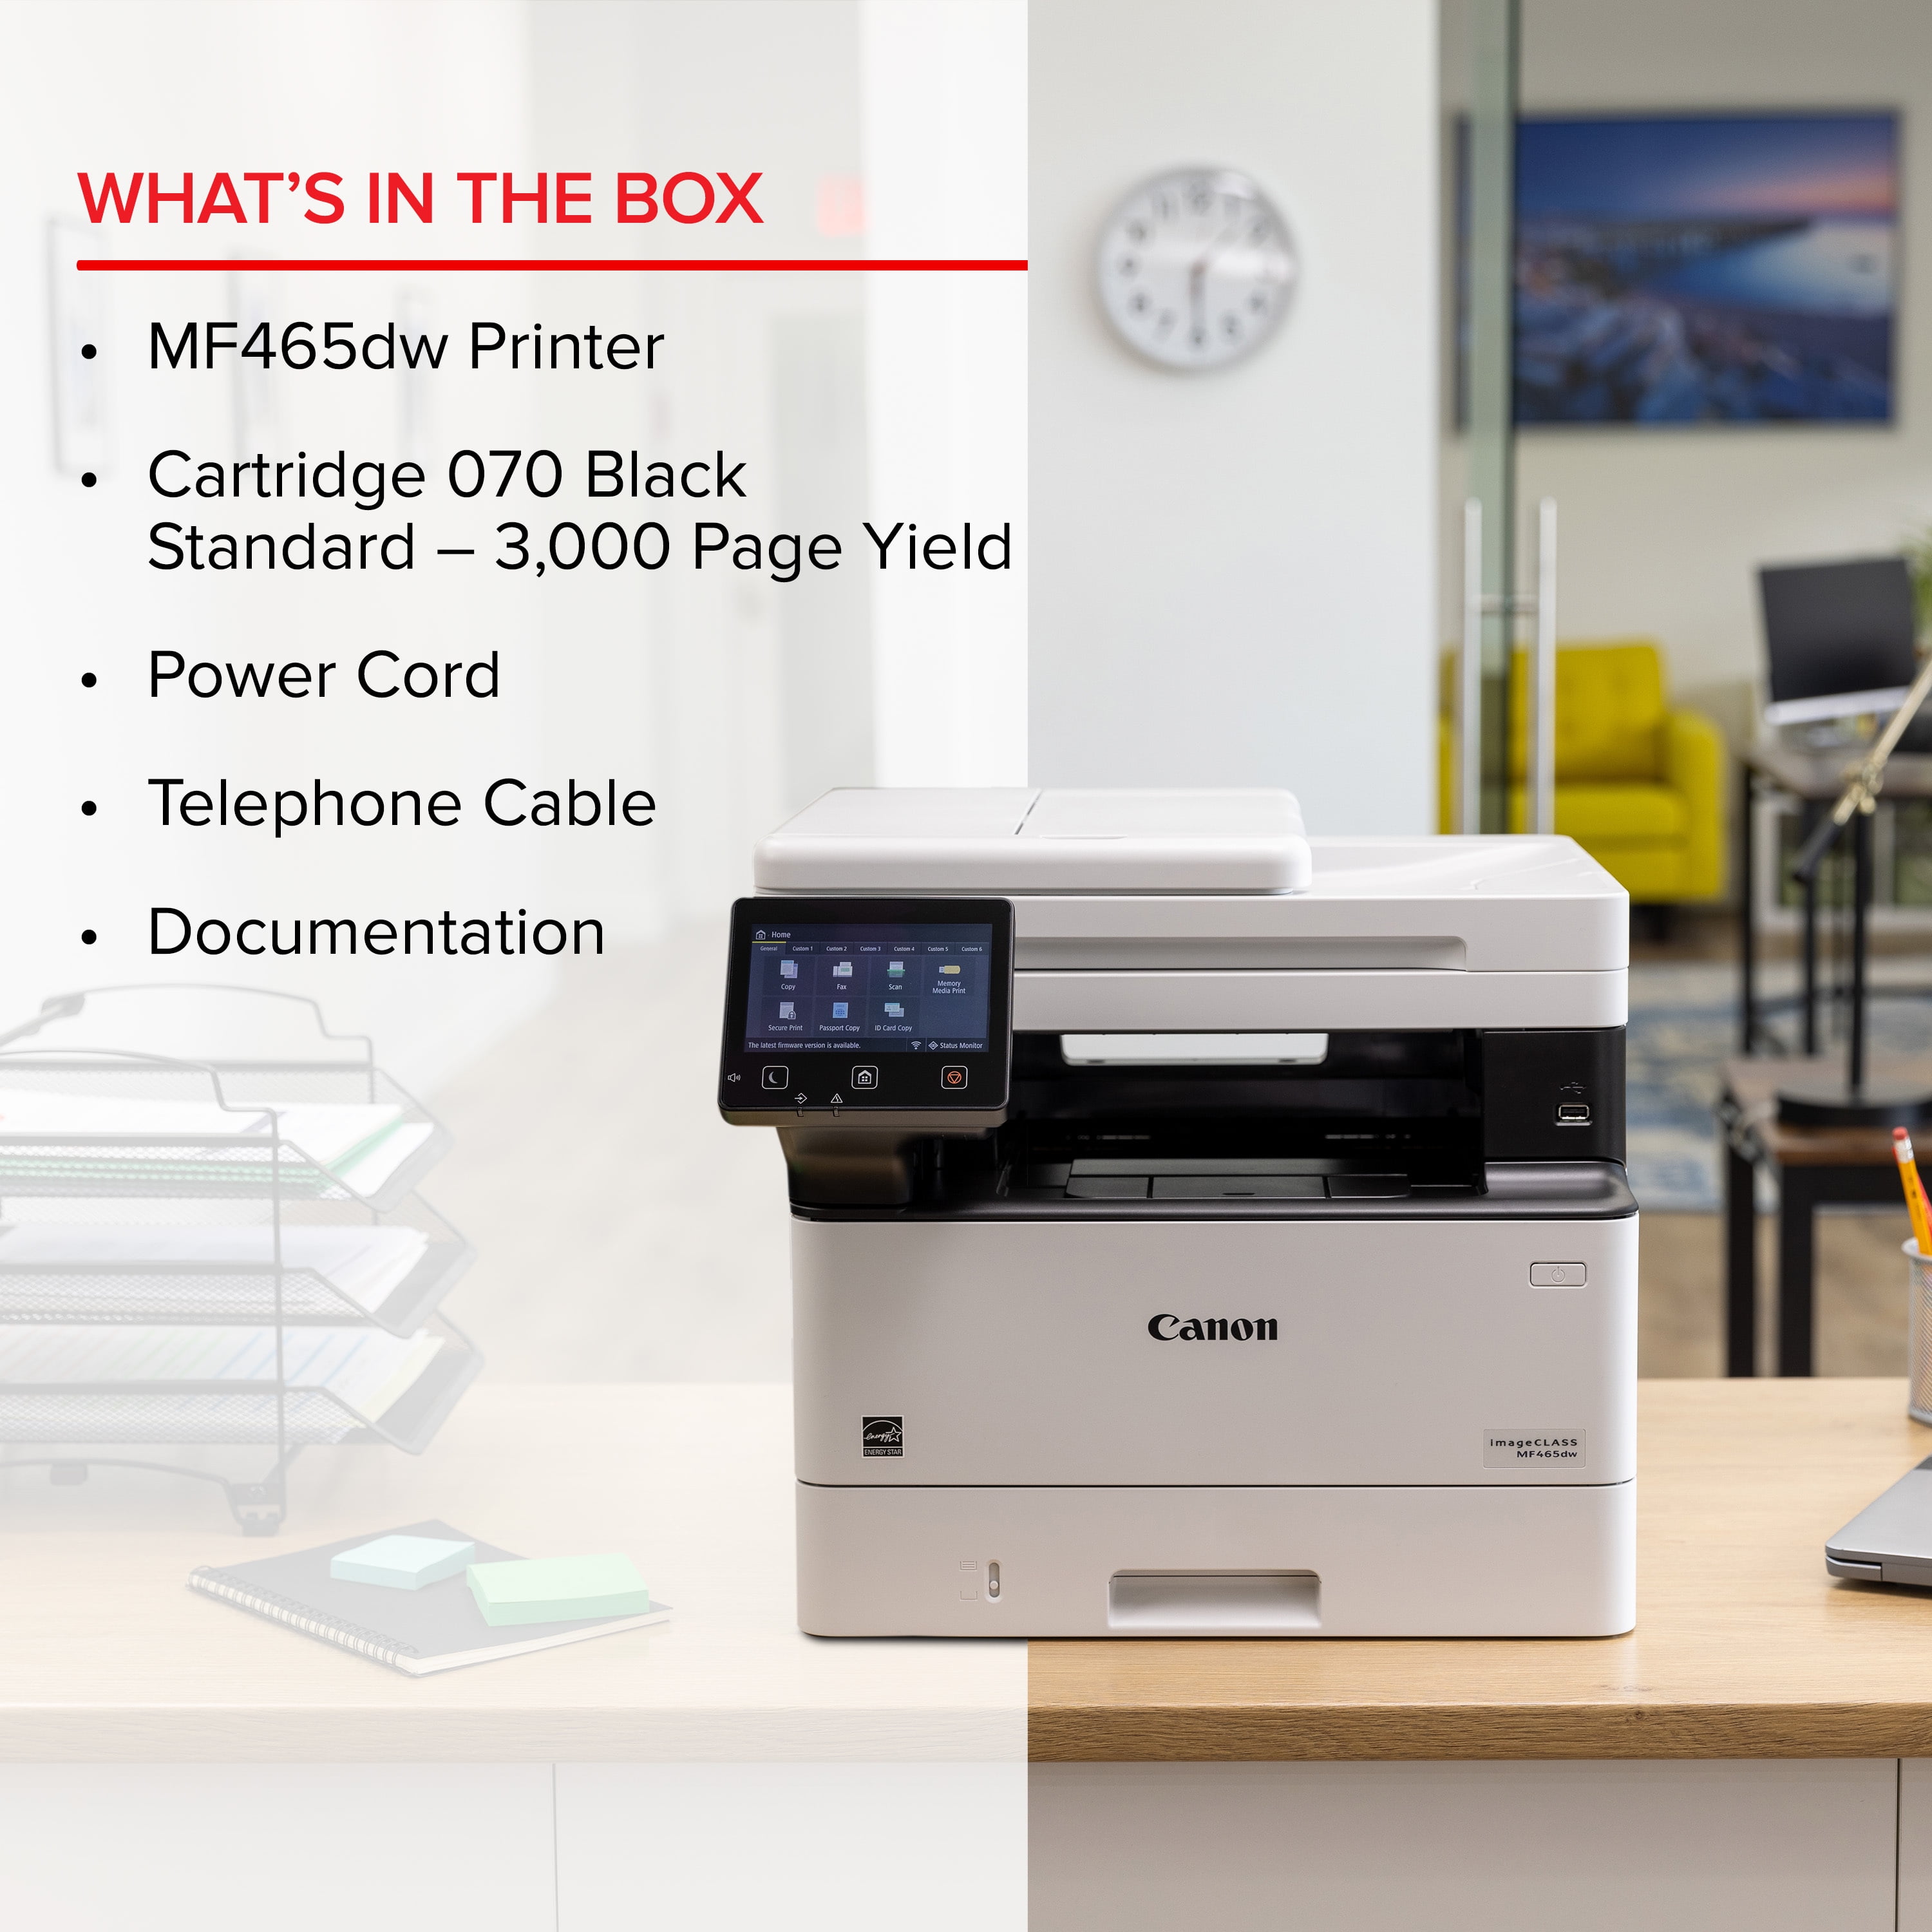 imageCLASS MF465dw - Wireless Duplex Laser Printer with Print, Copy, Scan,  Fax, Expandable Paper Capacity and 3 Year Limited Warranty